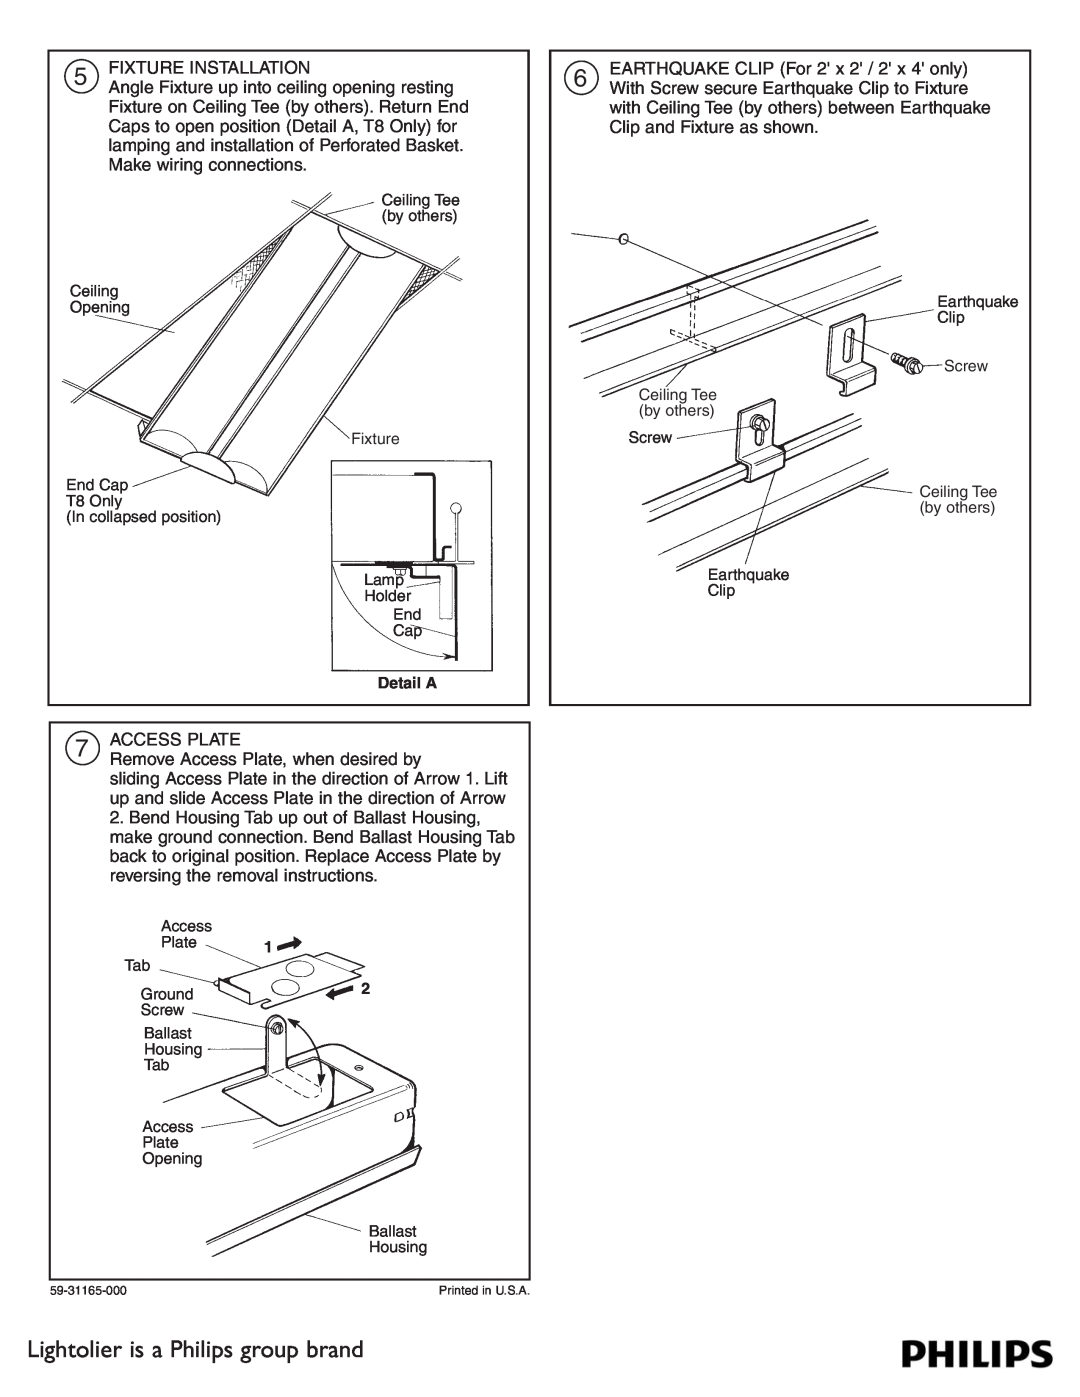 Lightolier Slot Grid Ceiling Systems installation instructions Lightolier is a Philips group brand, 5FIXTURE INSTALLATION 